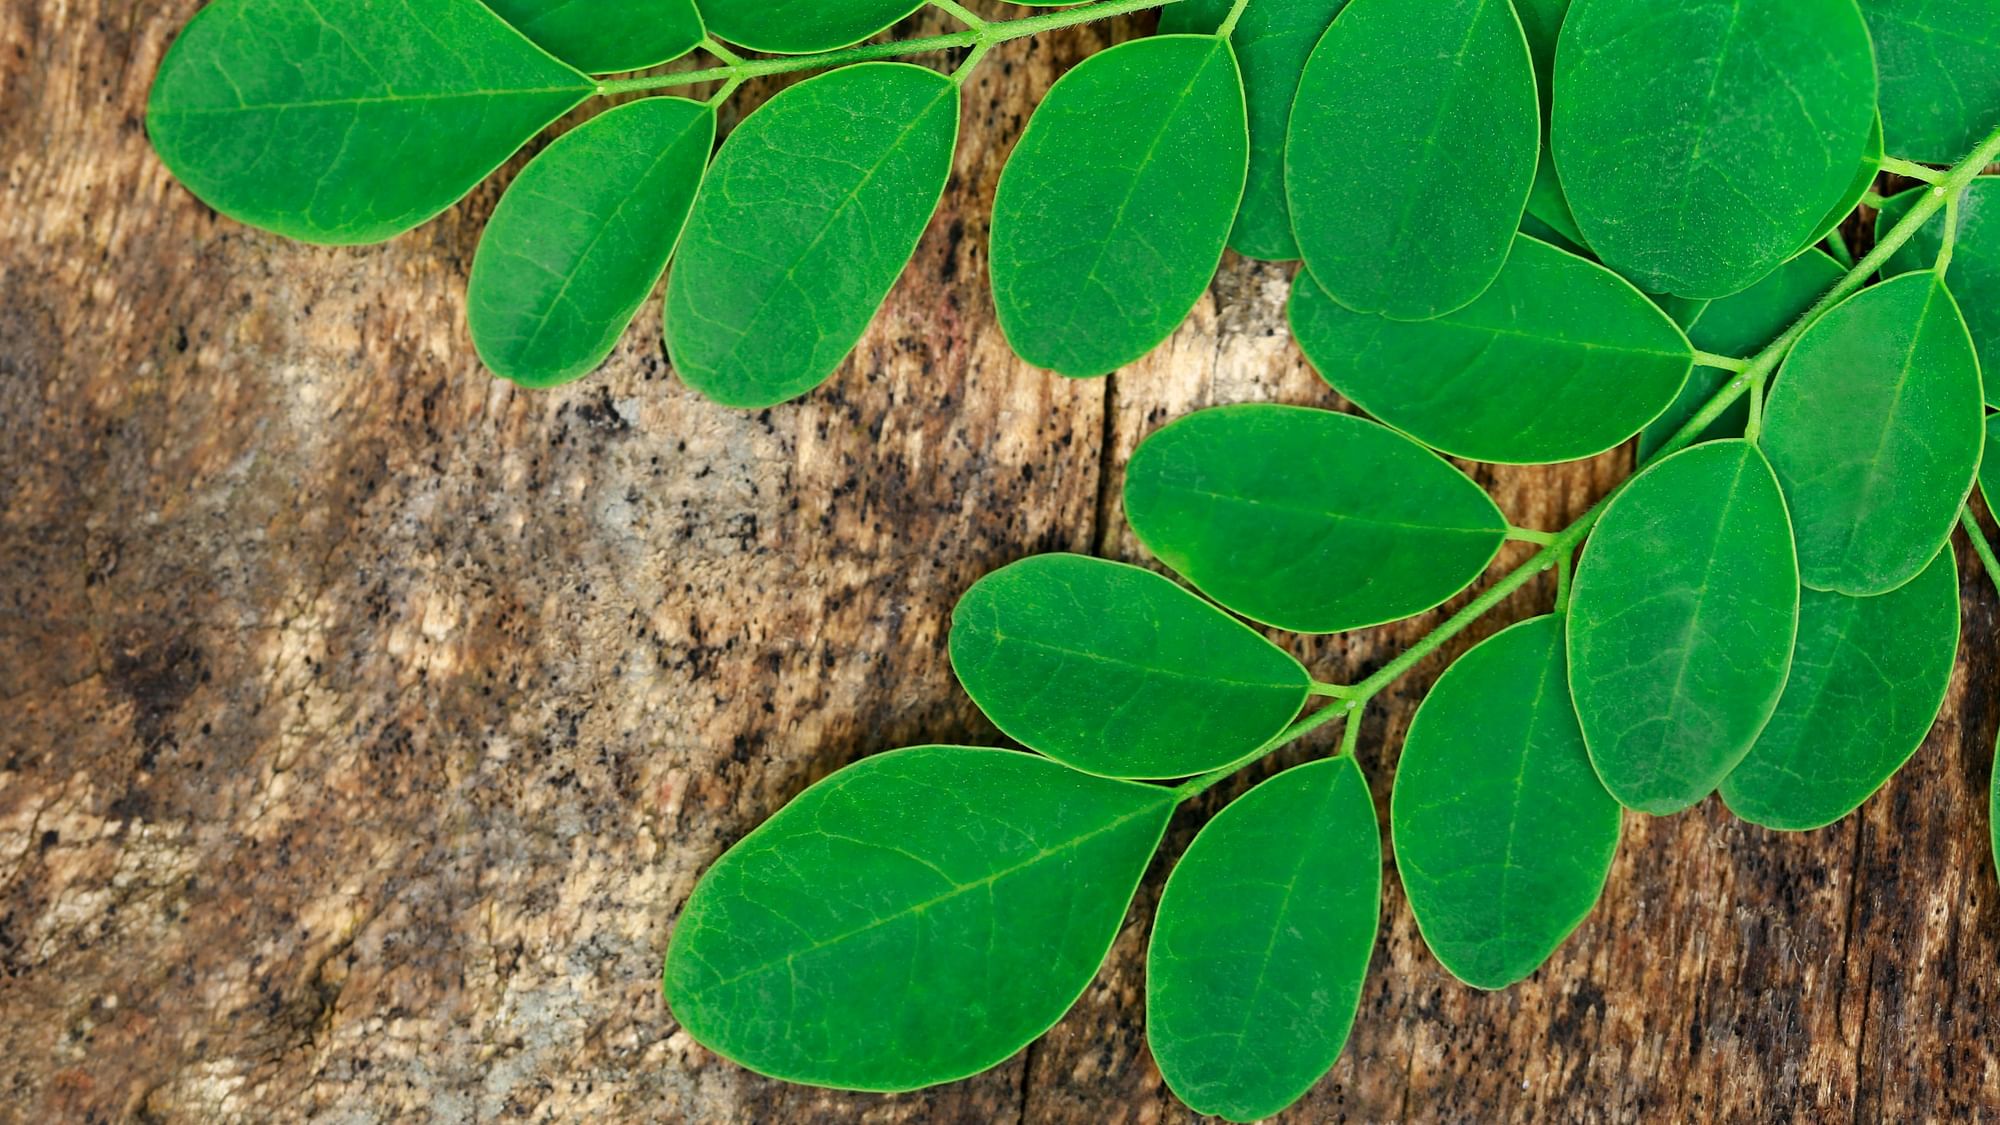 Moringa (Drumstick) Leaves Health Benefits: Moringa leaves are the most nutritional part of the plant, with an impressive nutritional profile consisting of Vitamins A, B, C, K.